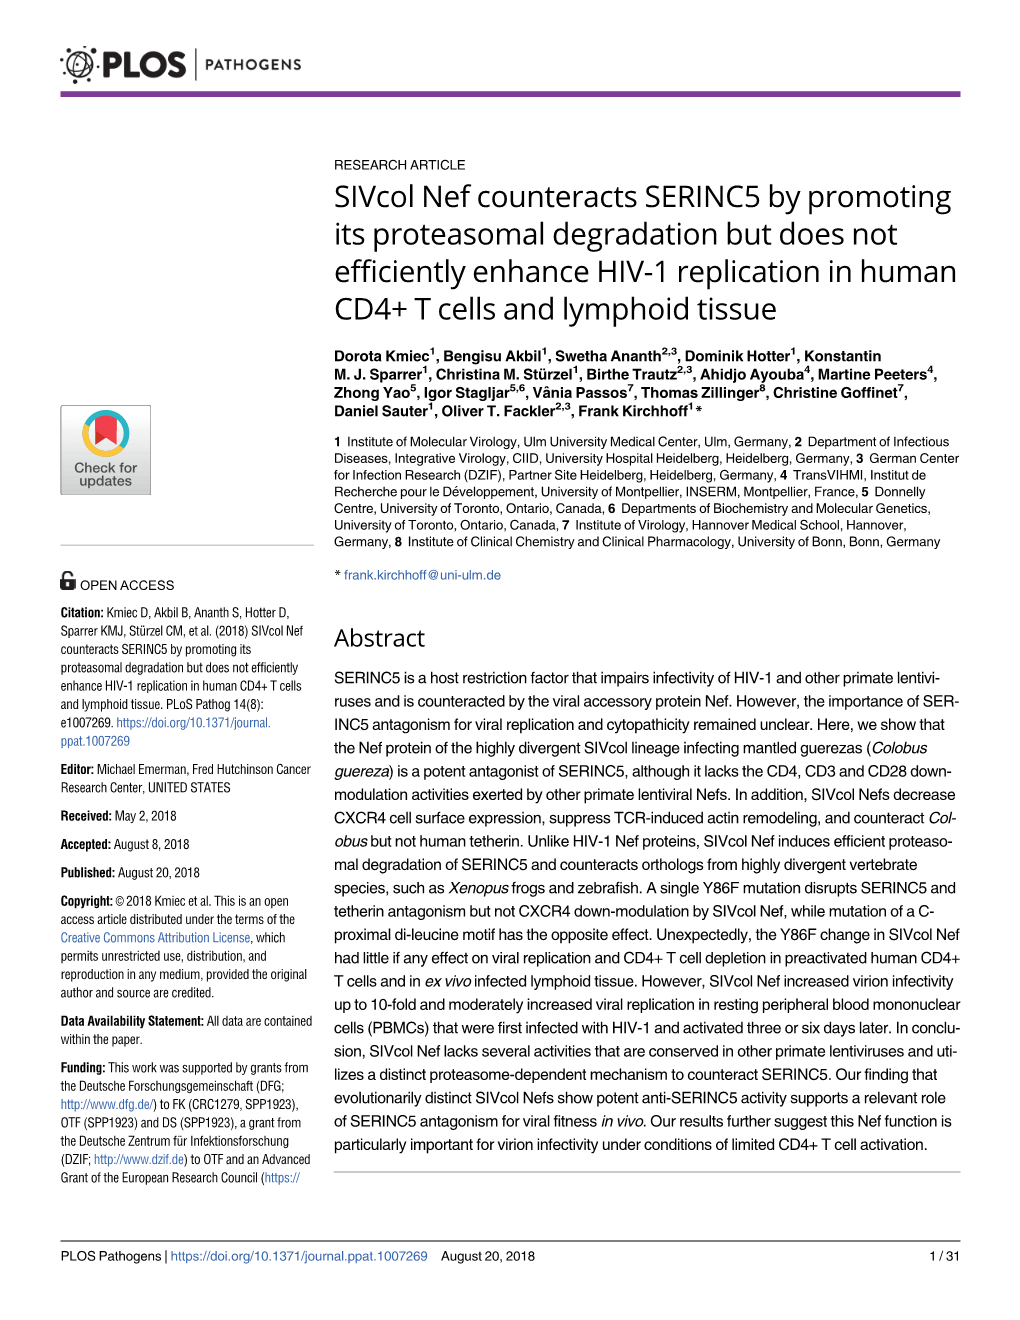 Sivcol Nef Counteracts SERINC5 by Promoting Its Proteasomal Degradation but Does Not Efficiently Enhance HIV-1 Replication in Human CD4+ T Cells and Lymphoid Tissue